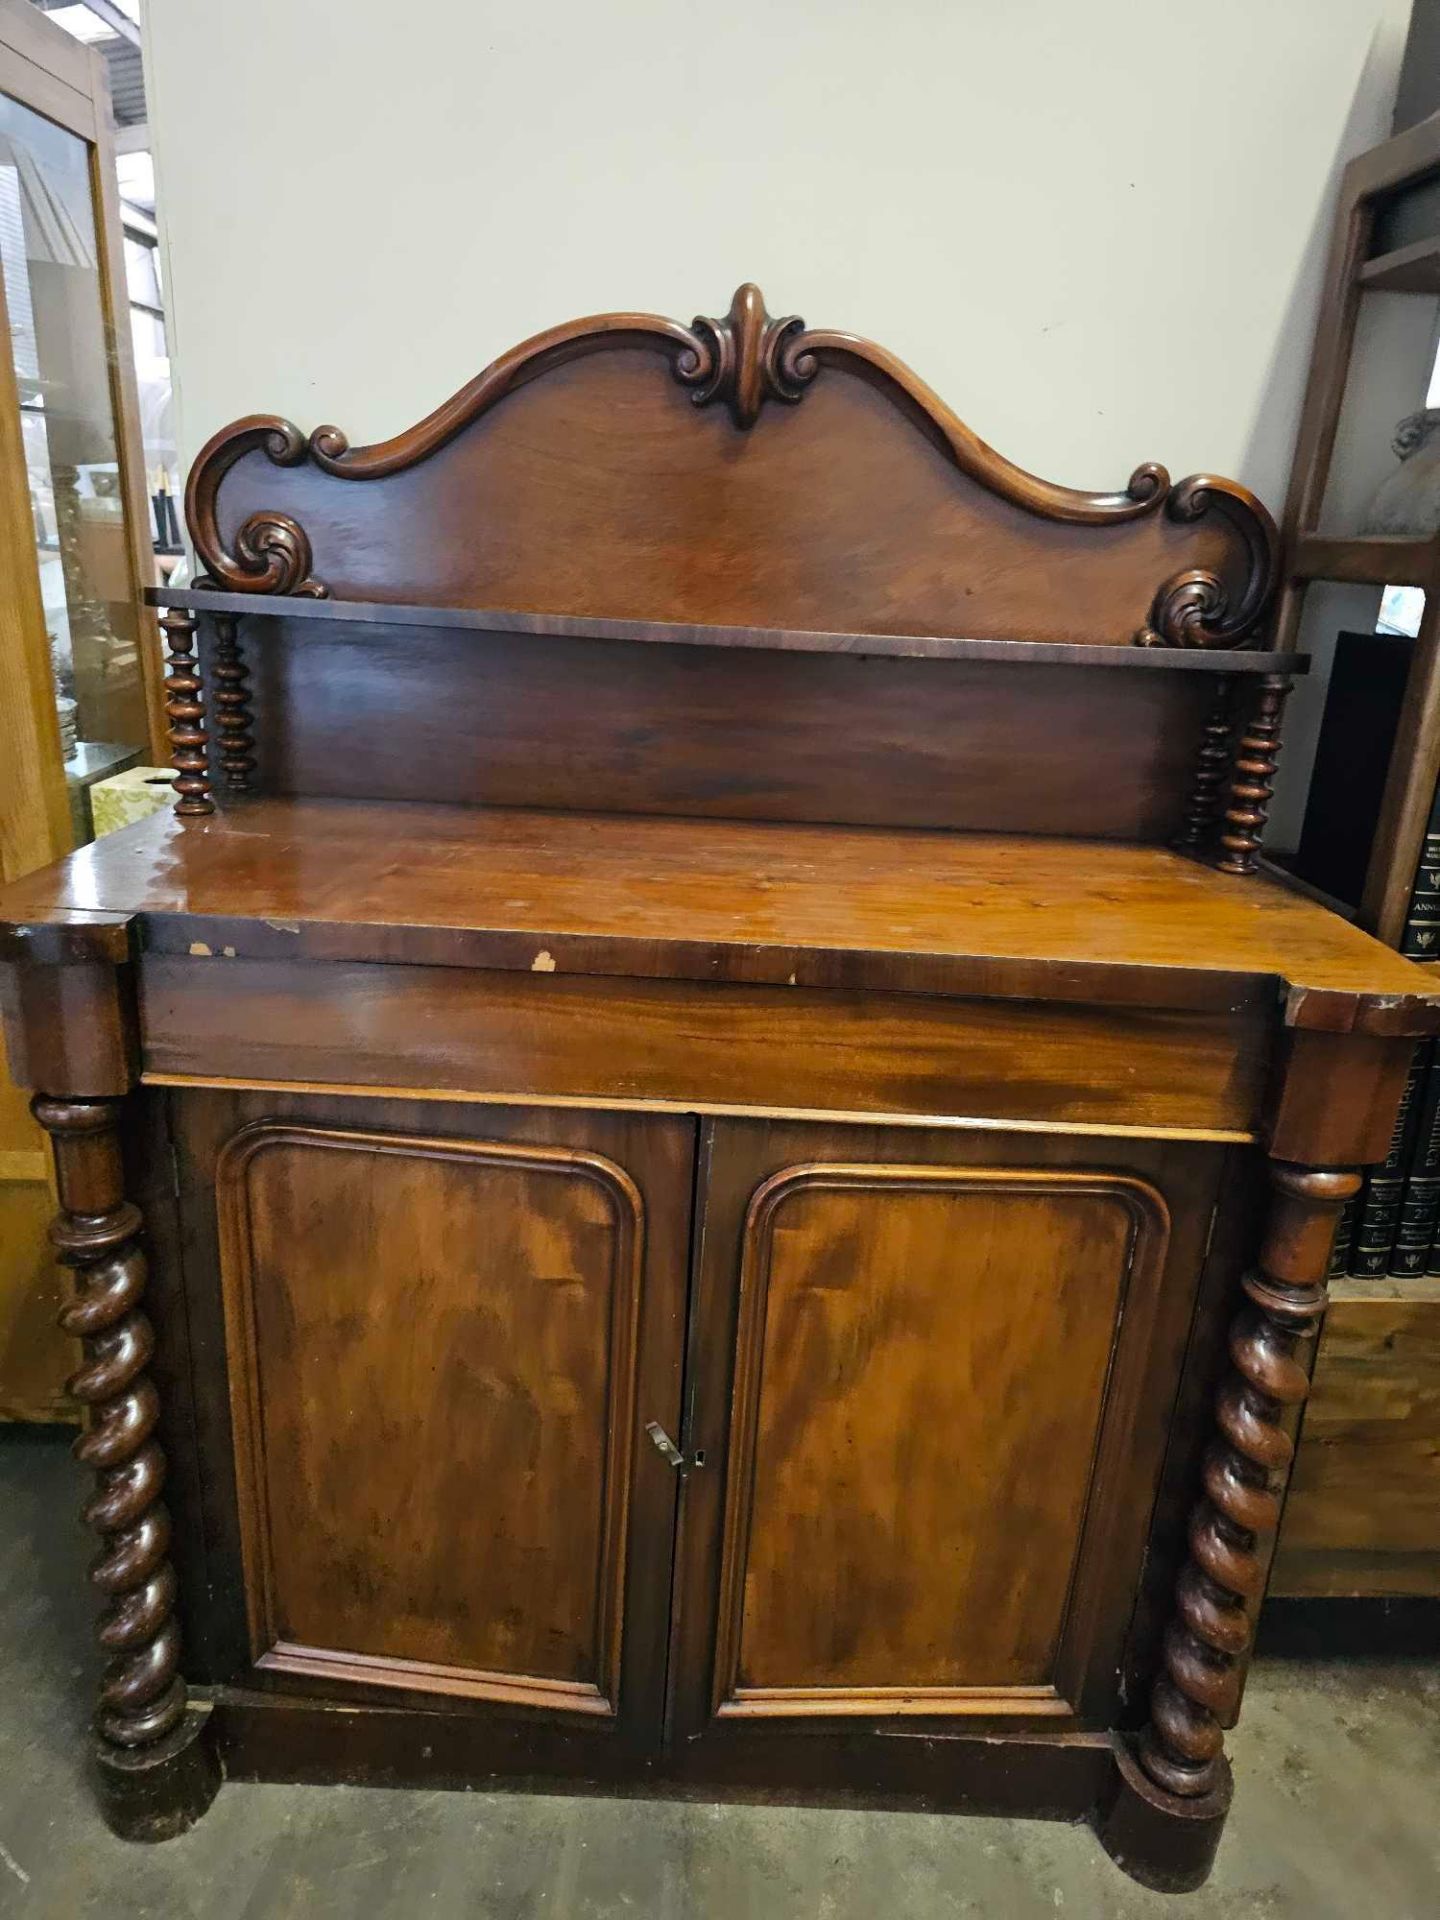 A Mahogany Victorian Style Chiffonier Two Door Cupboard With Drawers 120 x 55 x 150 (A/F)